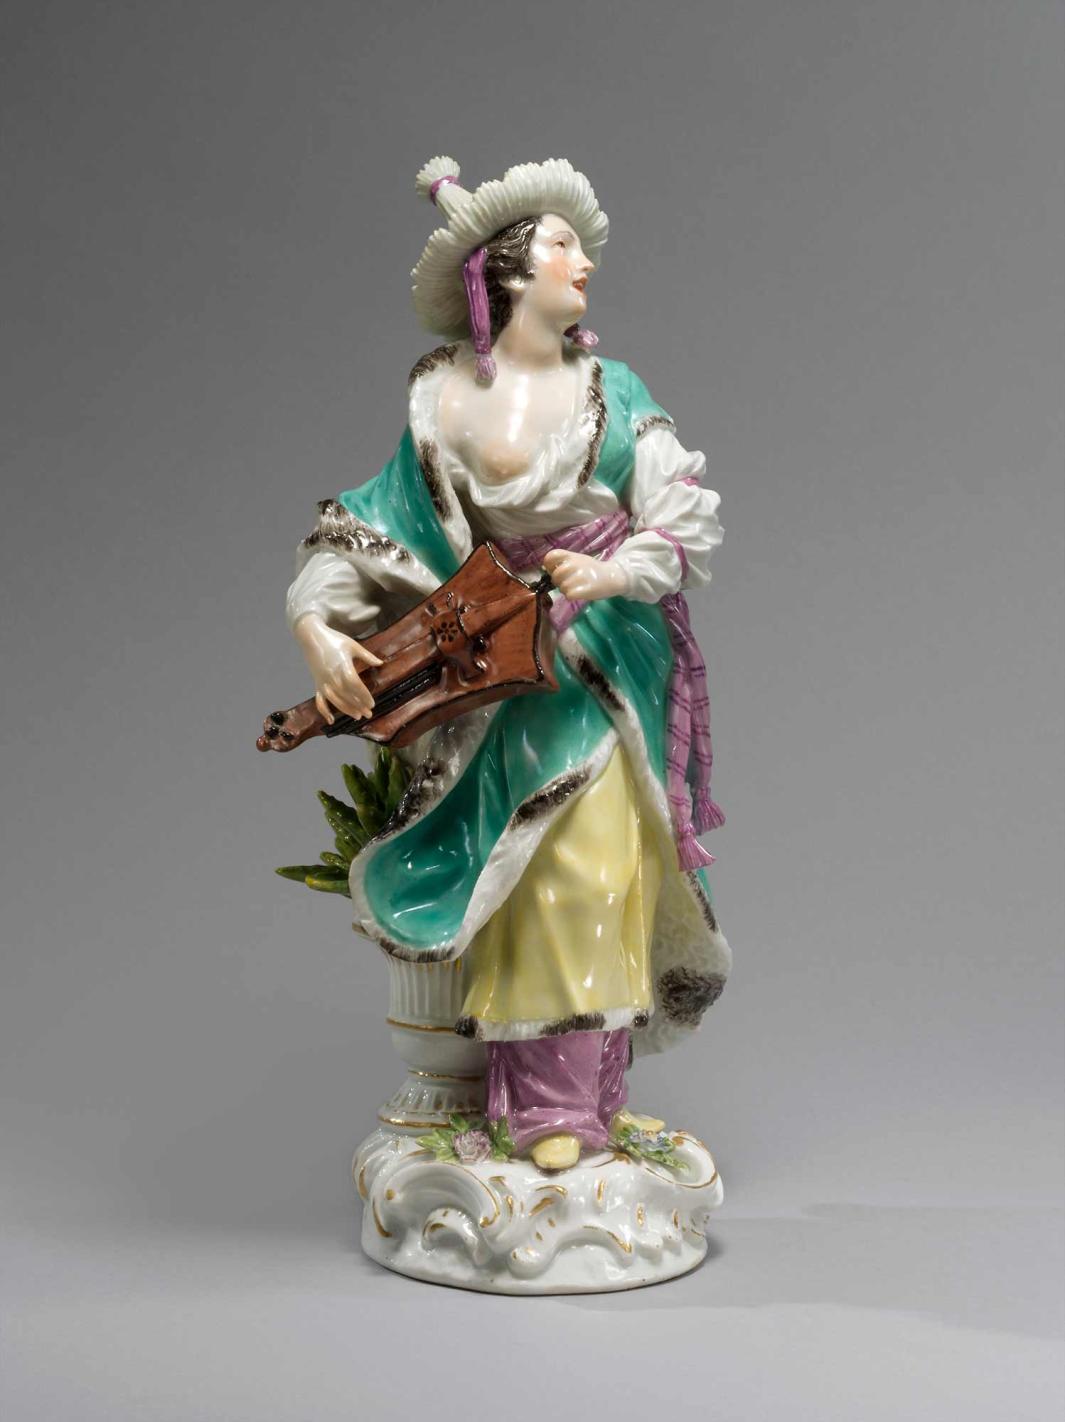 colorful porcelain female figure holding musical instrument